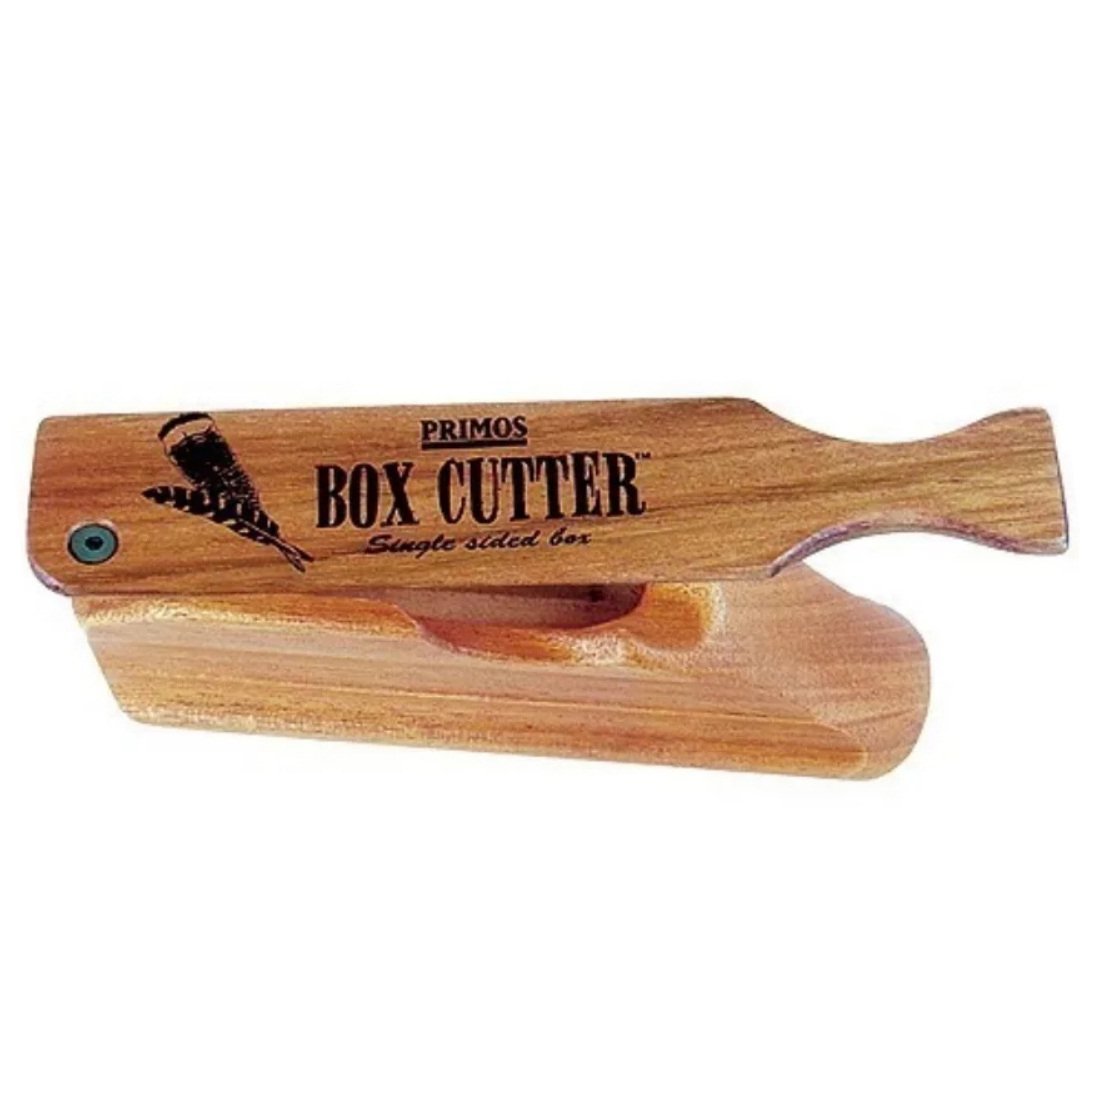 Primos Hunting Box Cutter Turkey Box Call - Pacific Flyway Supplies